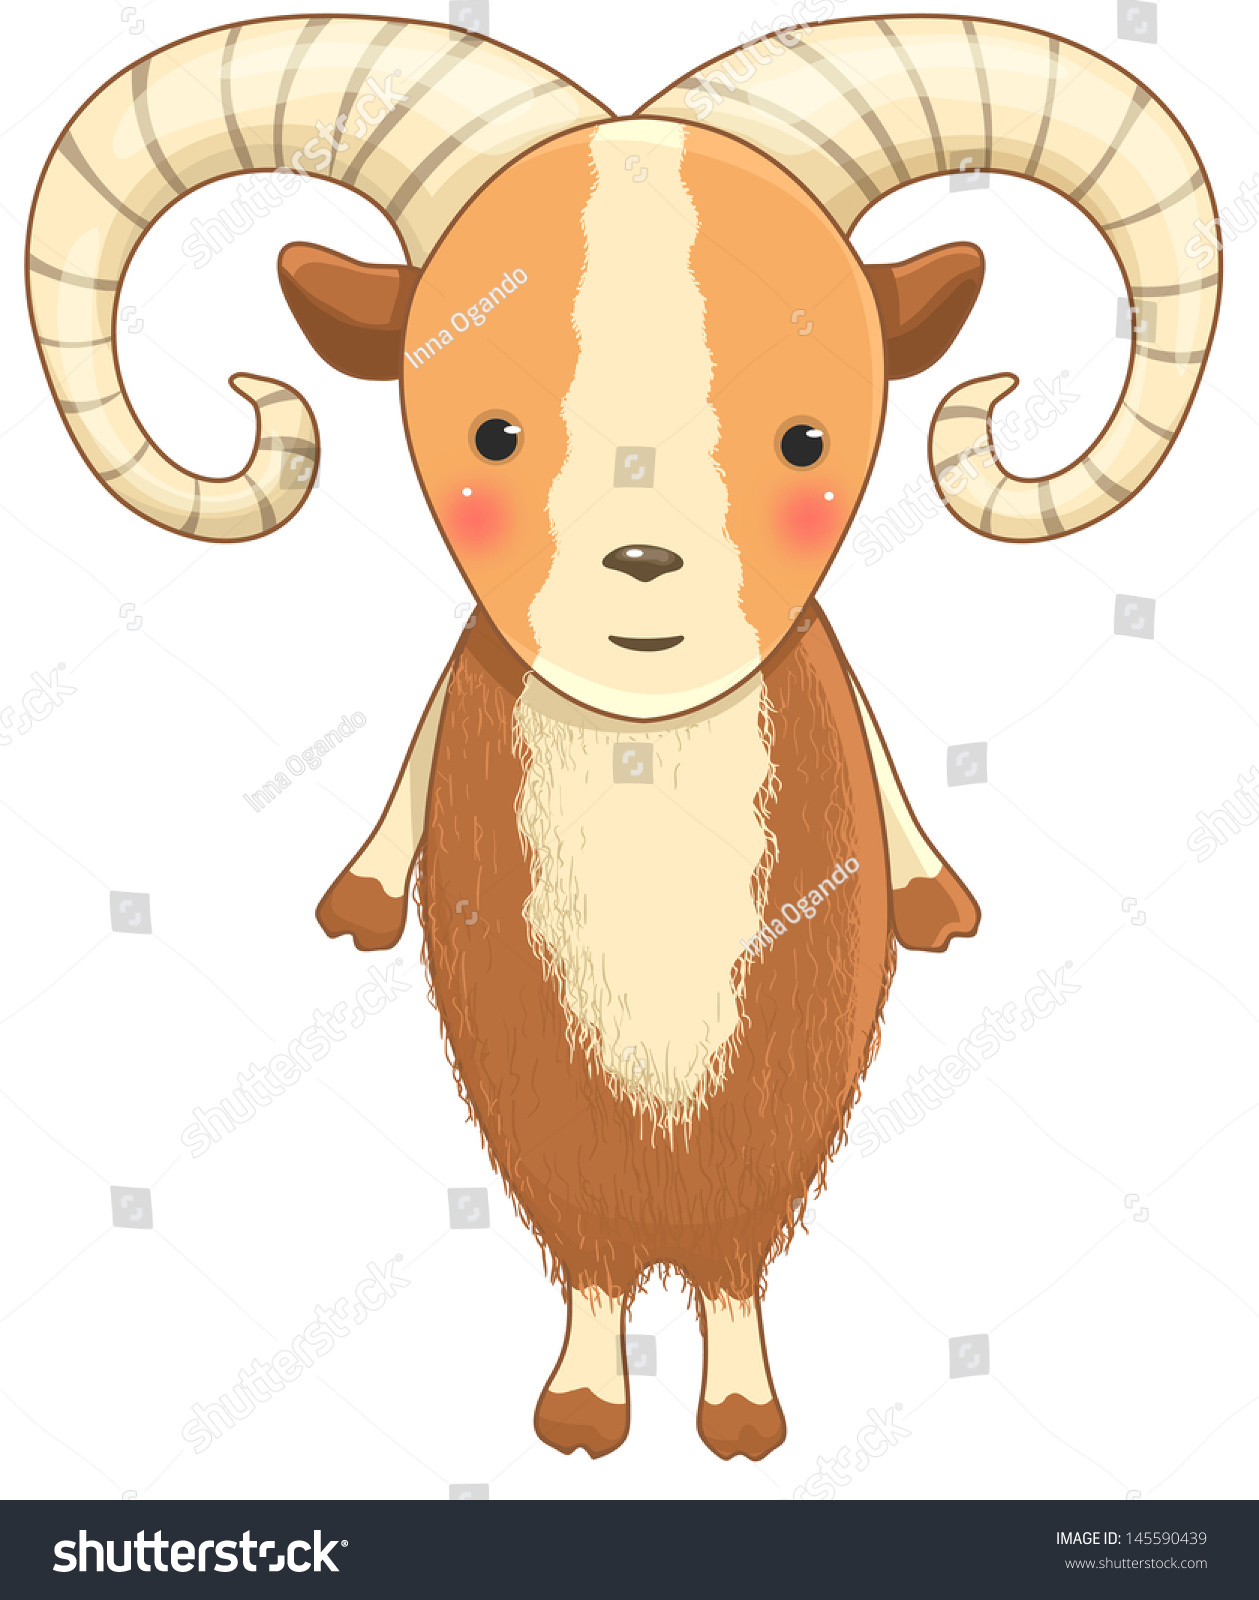 Urial PNG - 80211